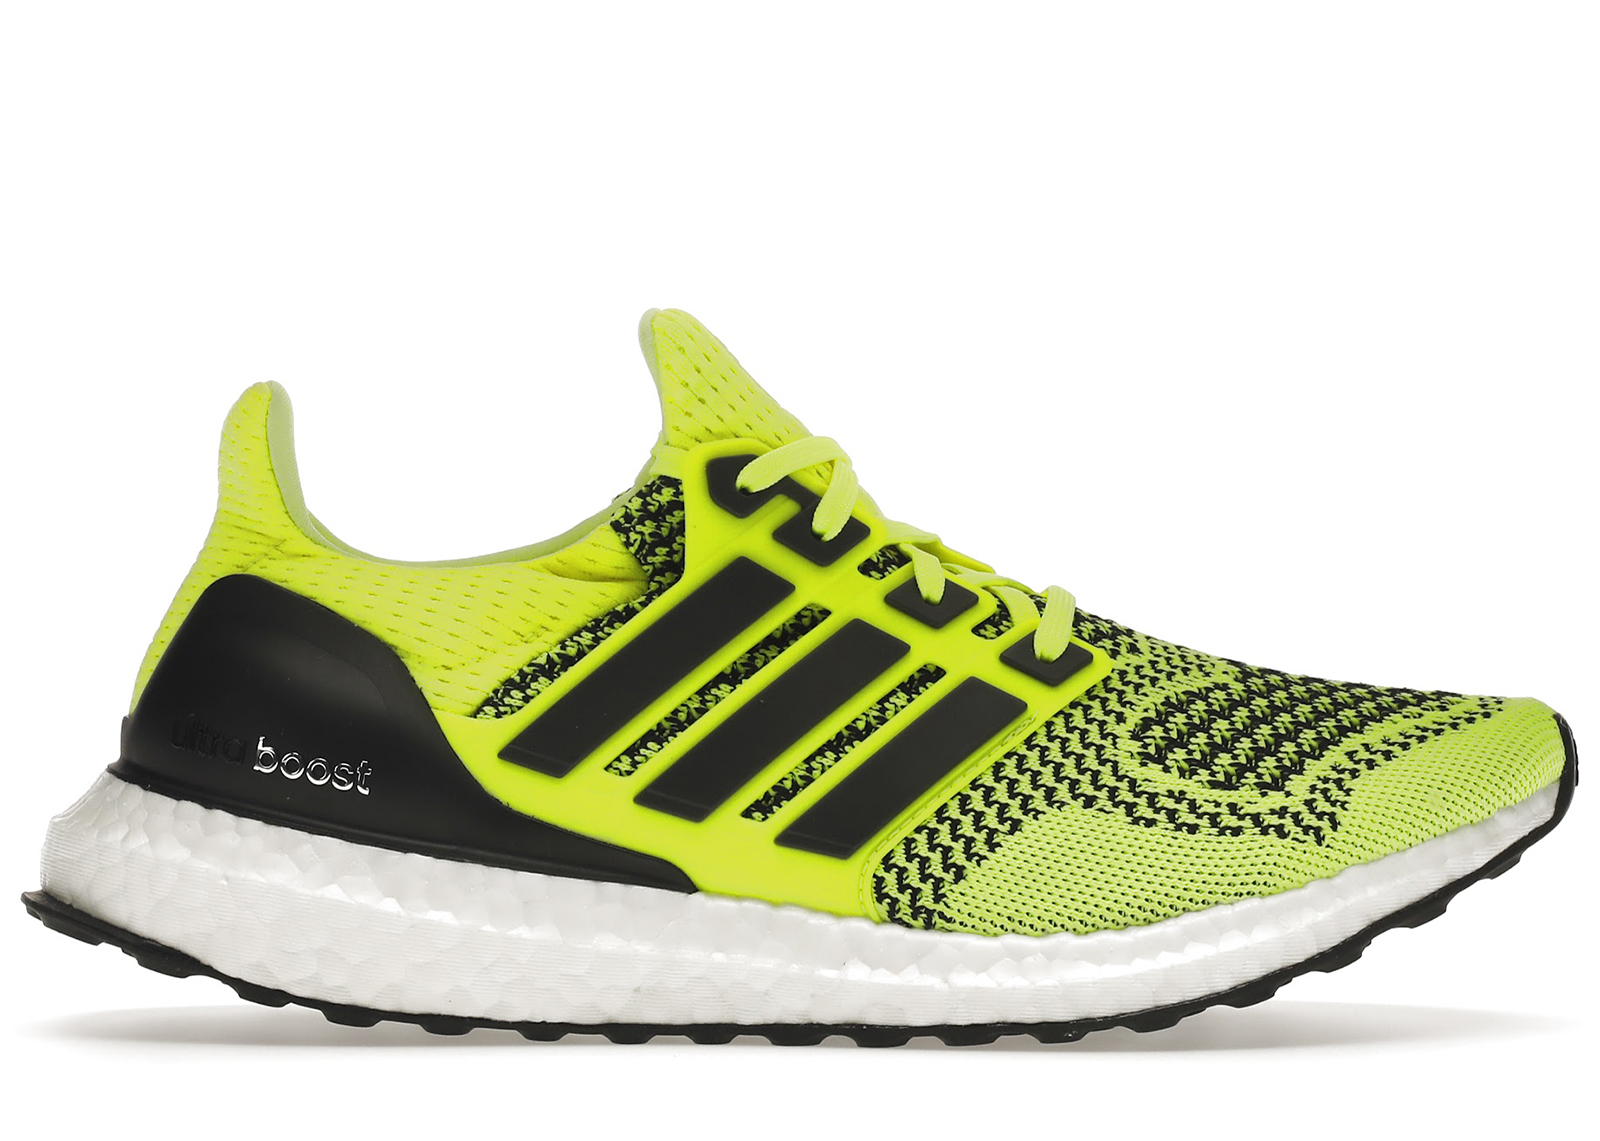 ultra boost 1.0 solar yellow release